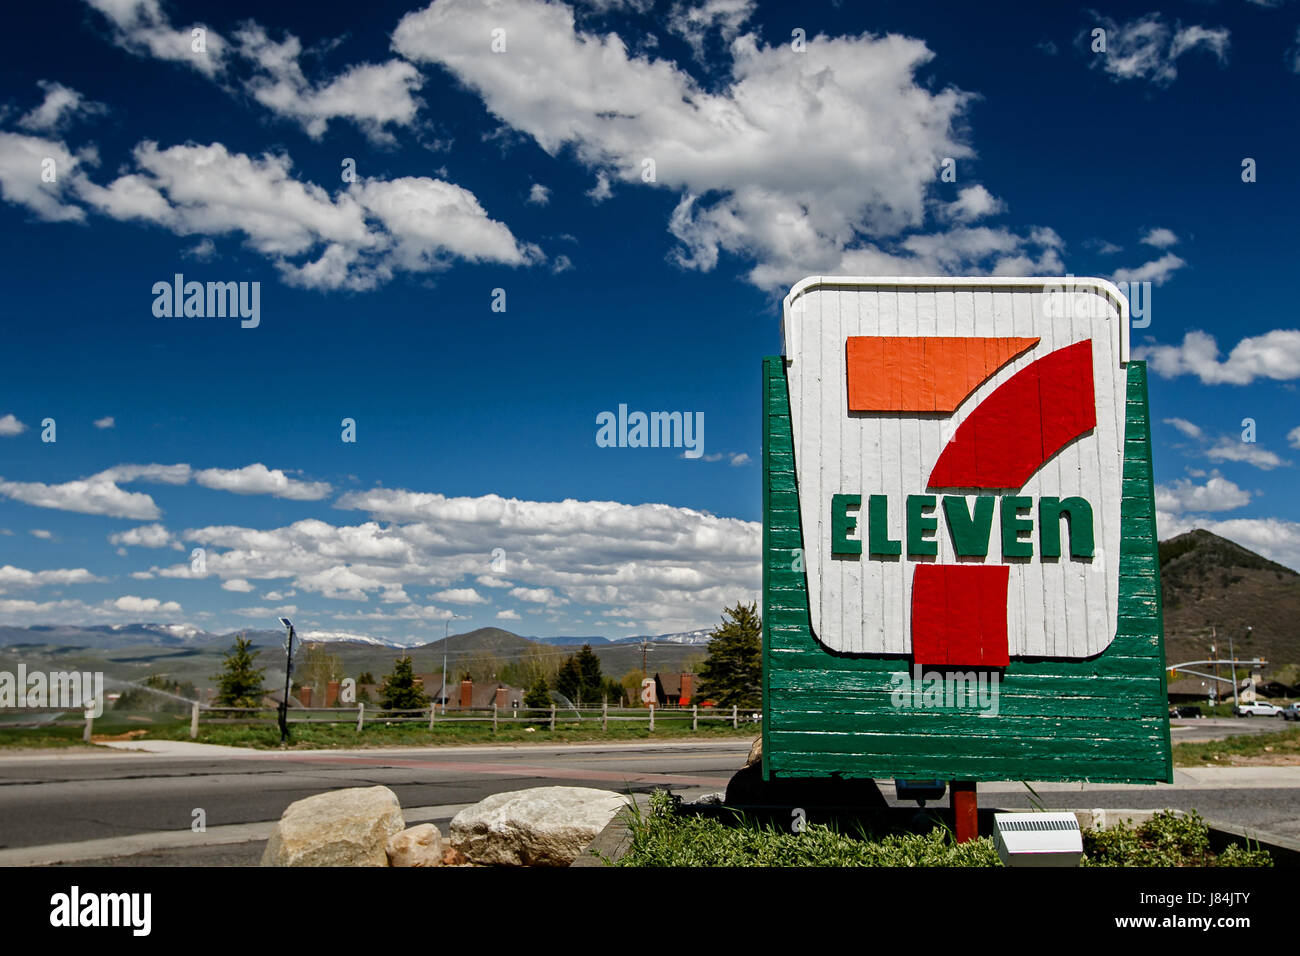 Park City, UT, May 12, 2017: 7-Eleven sign against a picturesque landscape is brightly lit by the sun. Stock Photo